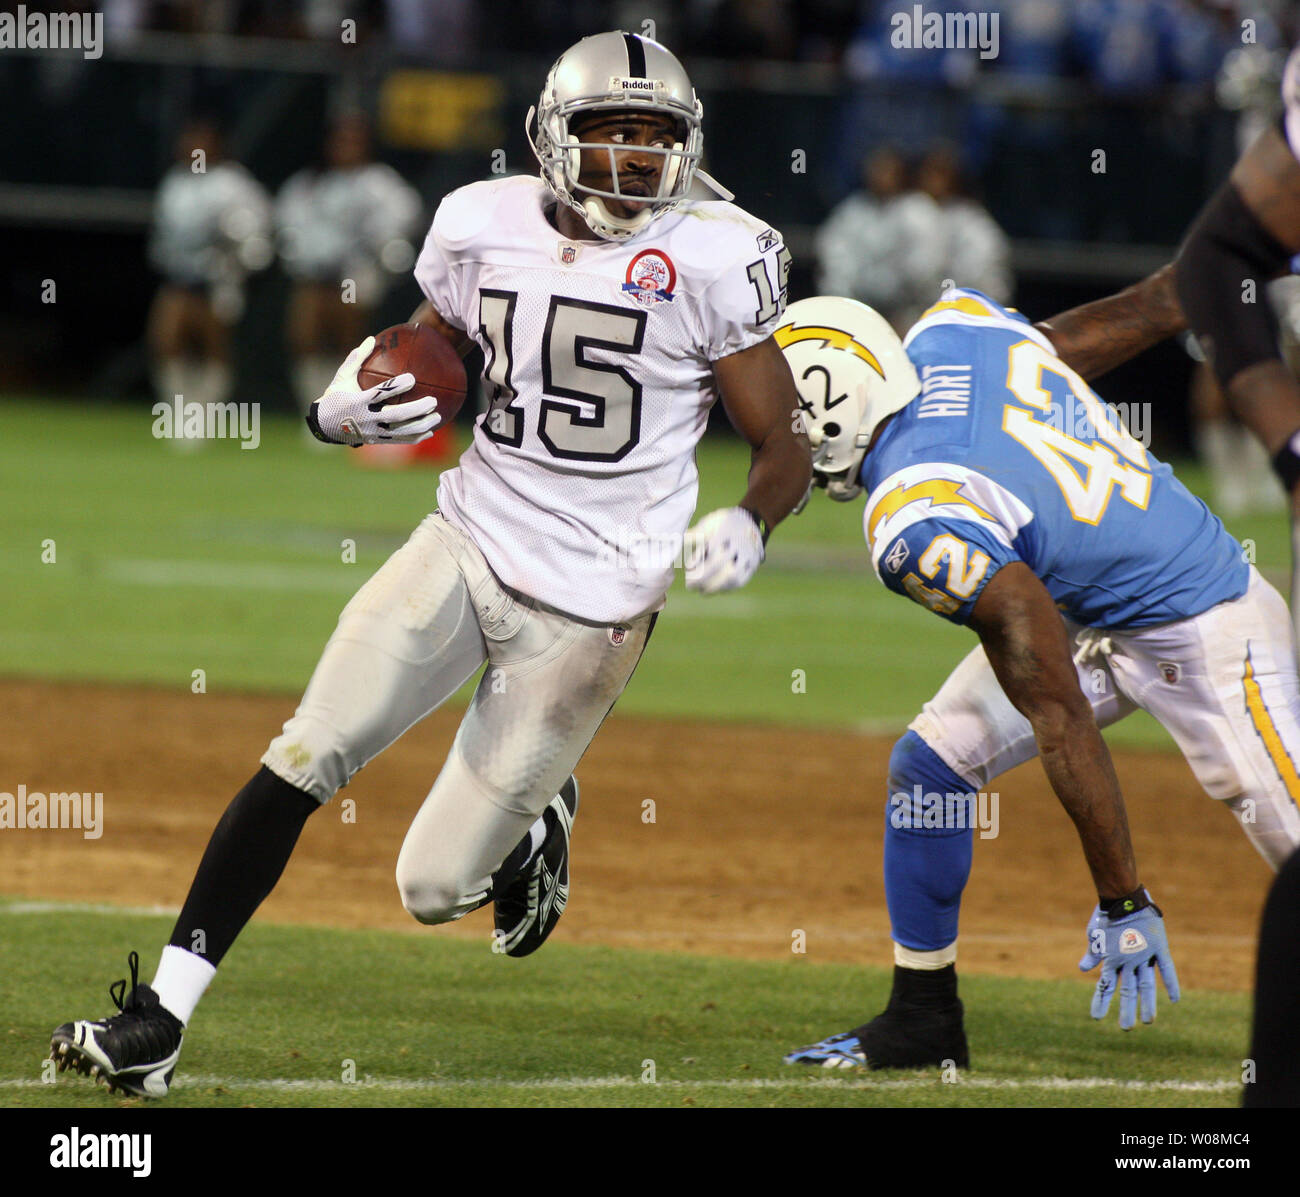 Oakland Raiders WR Johnnie Lee Higgins (15) runs past San Diego Chargers  Clinton Hart on a reverse in the third quarter at the Oakland Coliseum in  Oakland, California on September 14, 2009.